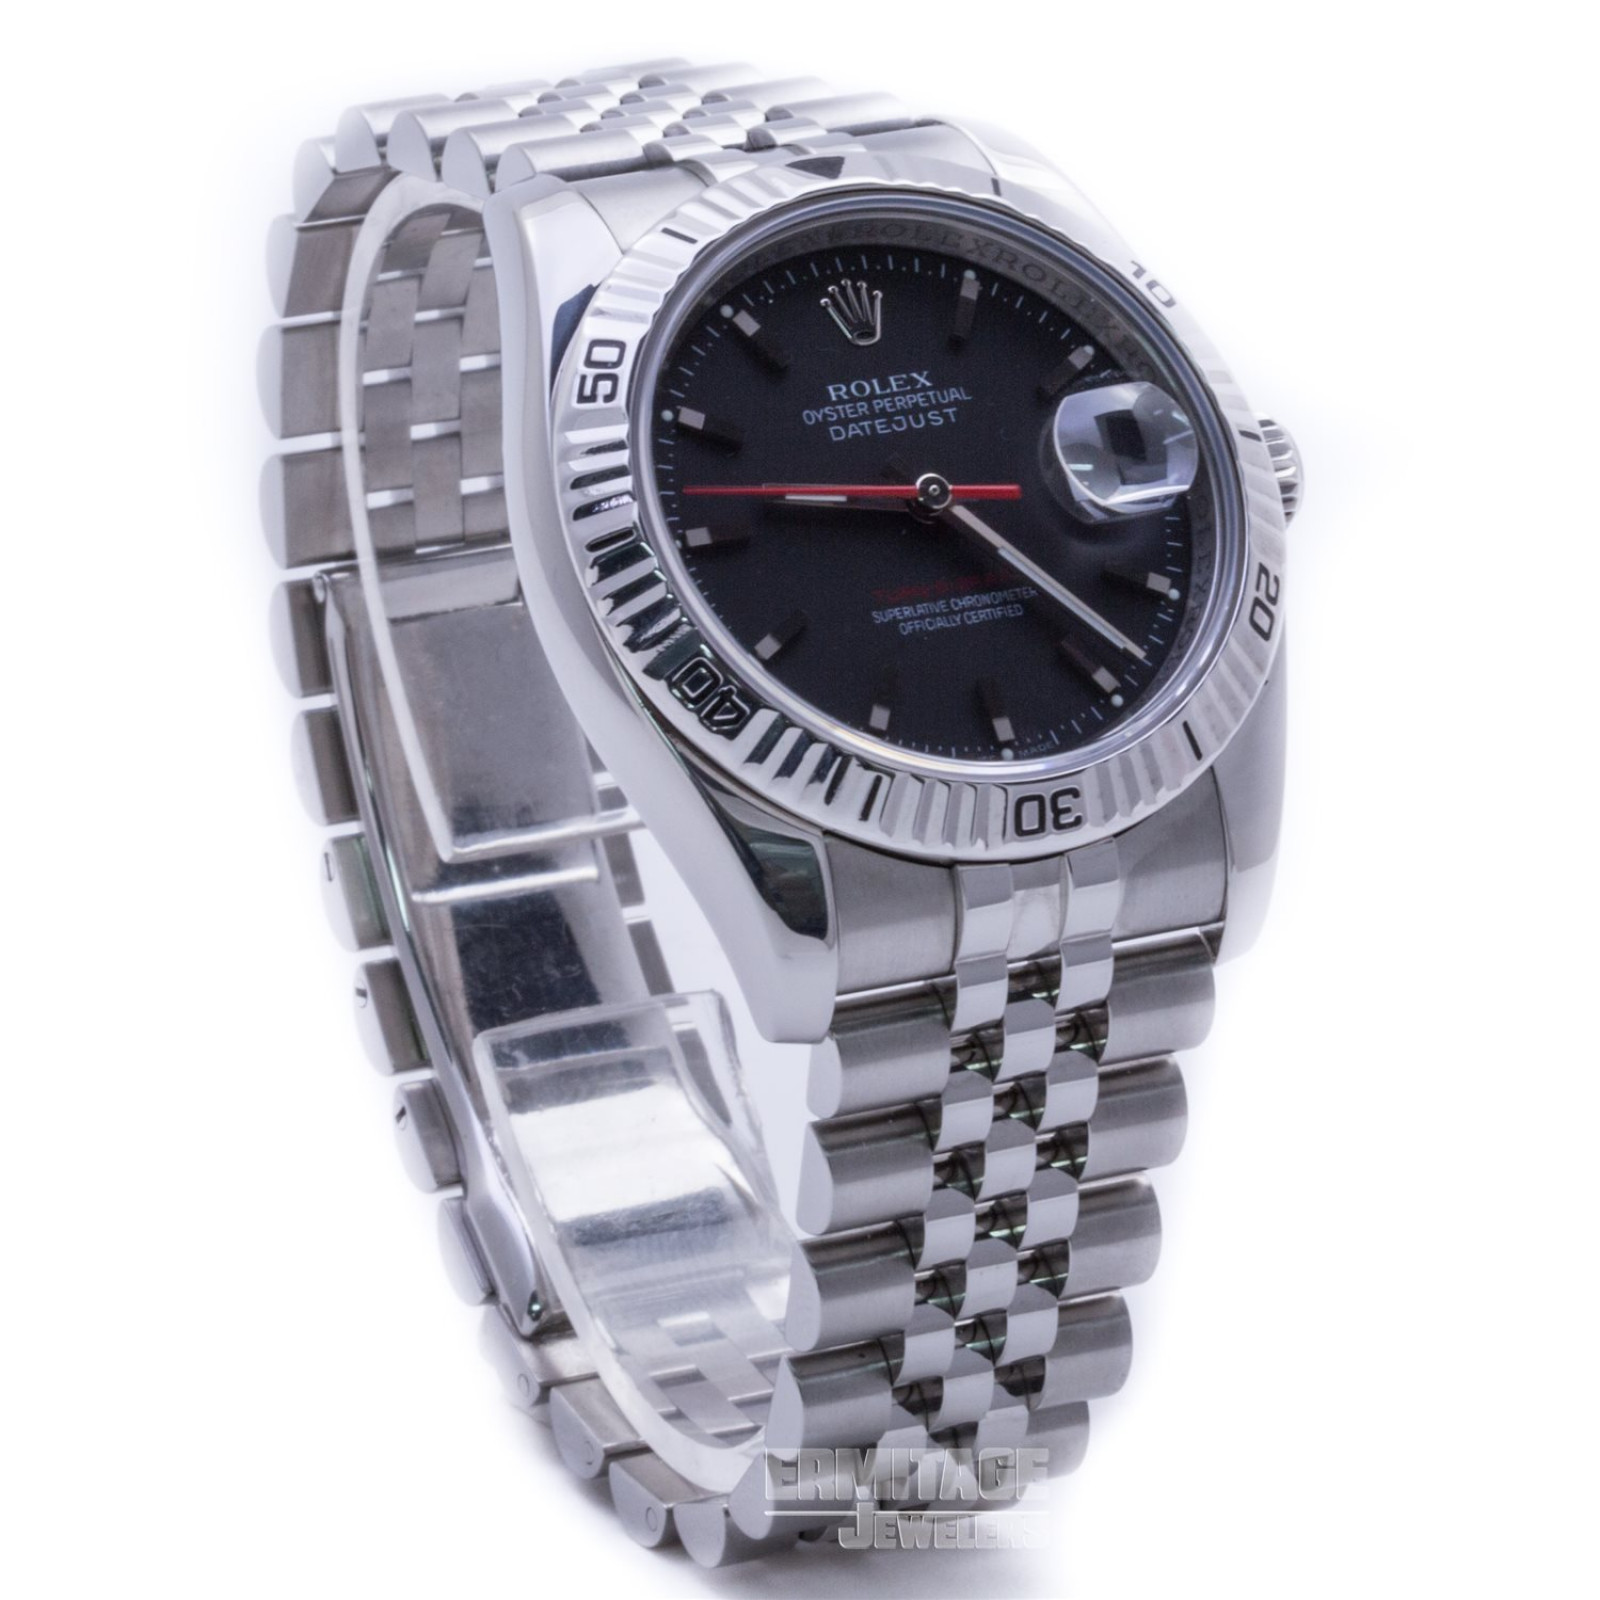 White Gold Fluted Rolex Datejust Turn-O-Graph 116264